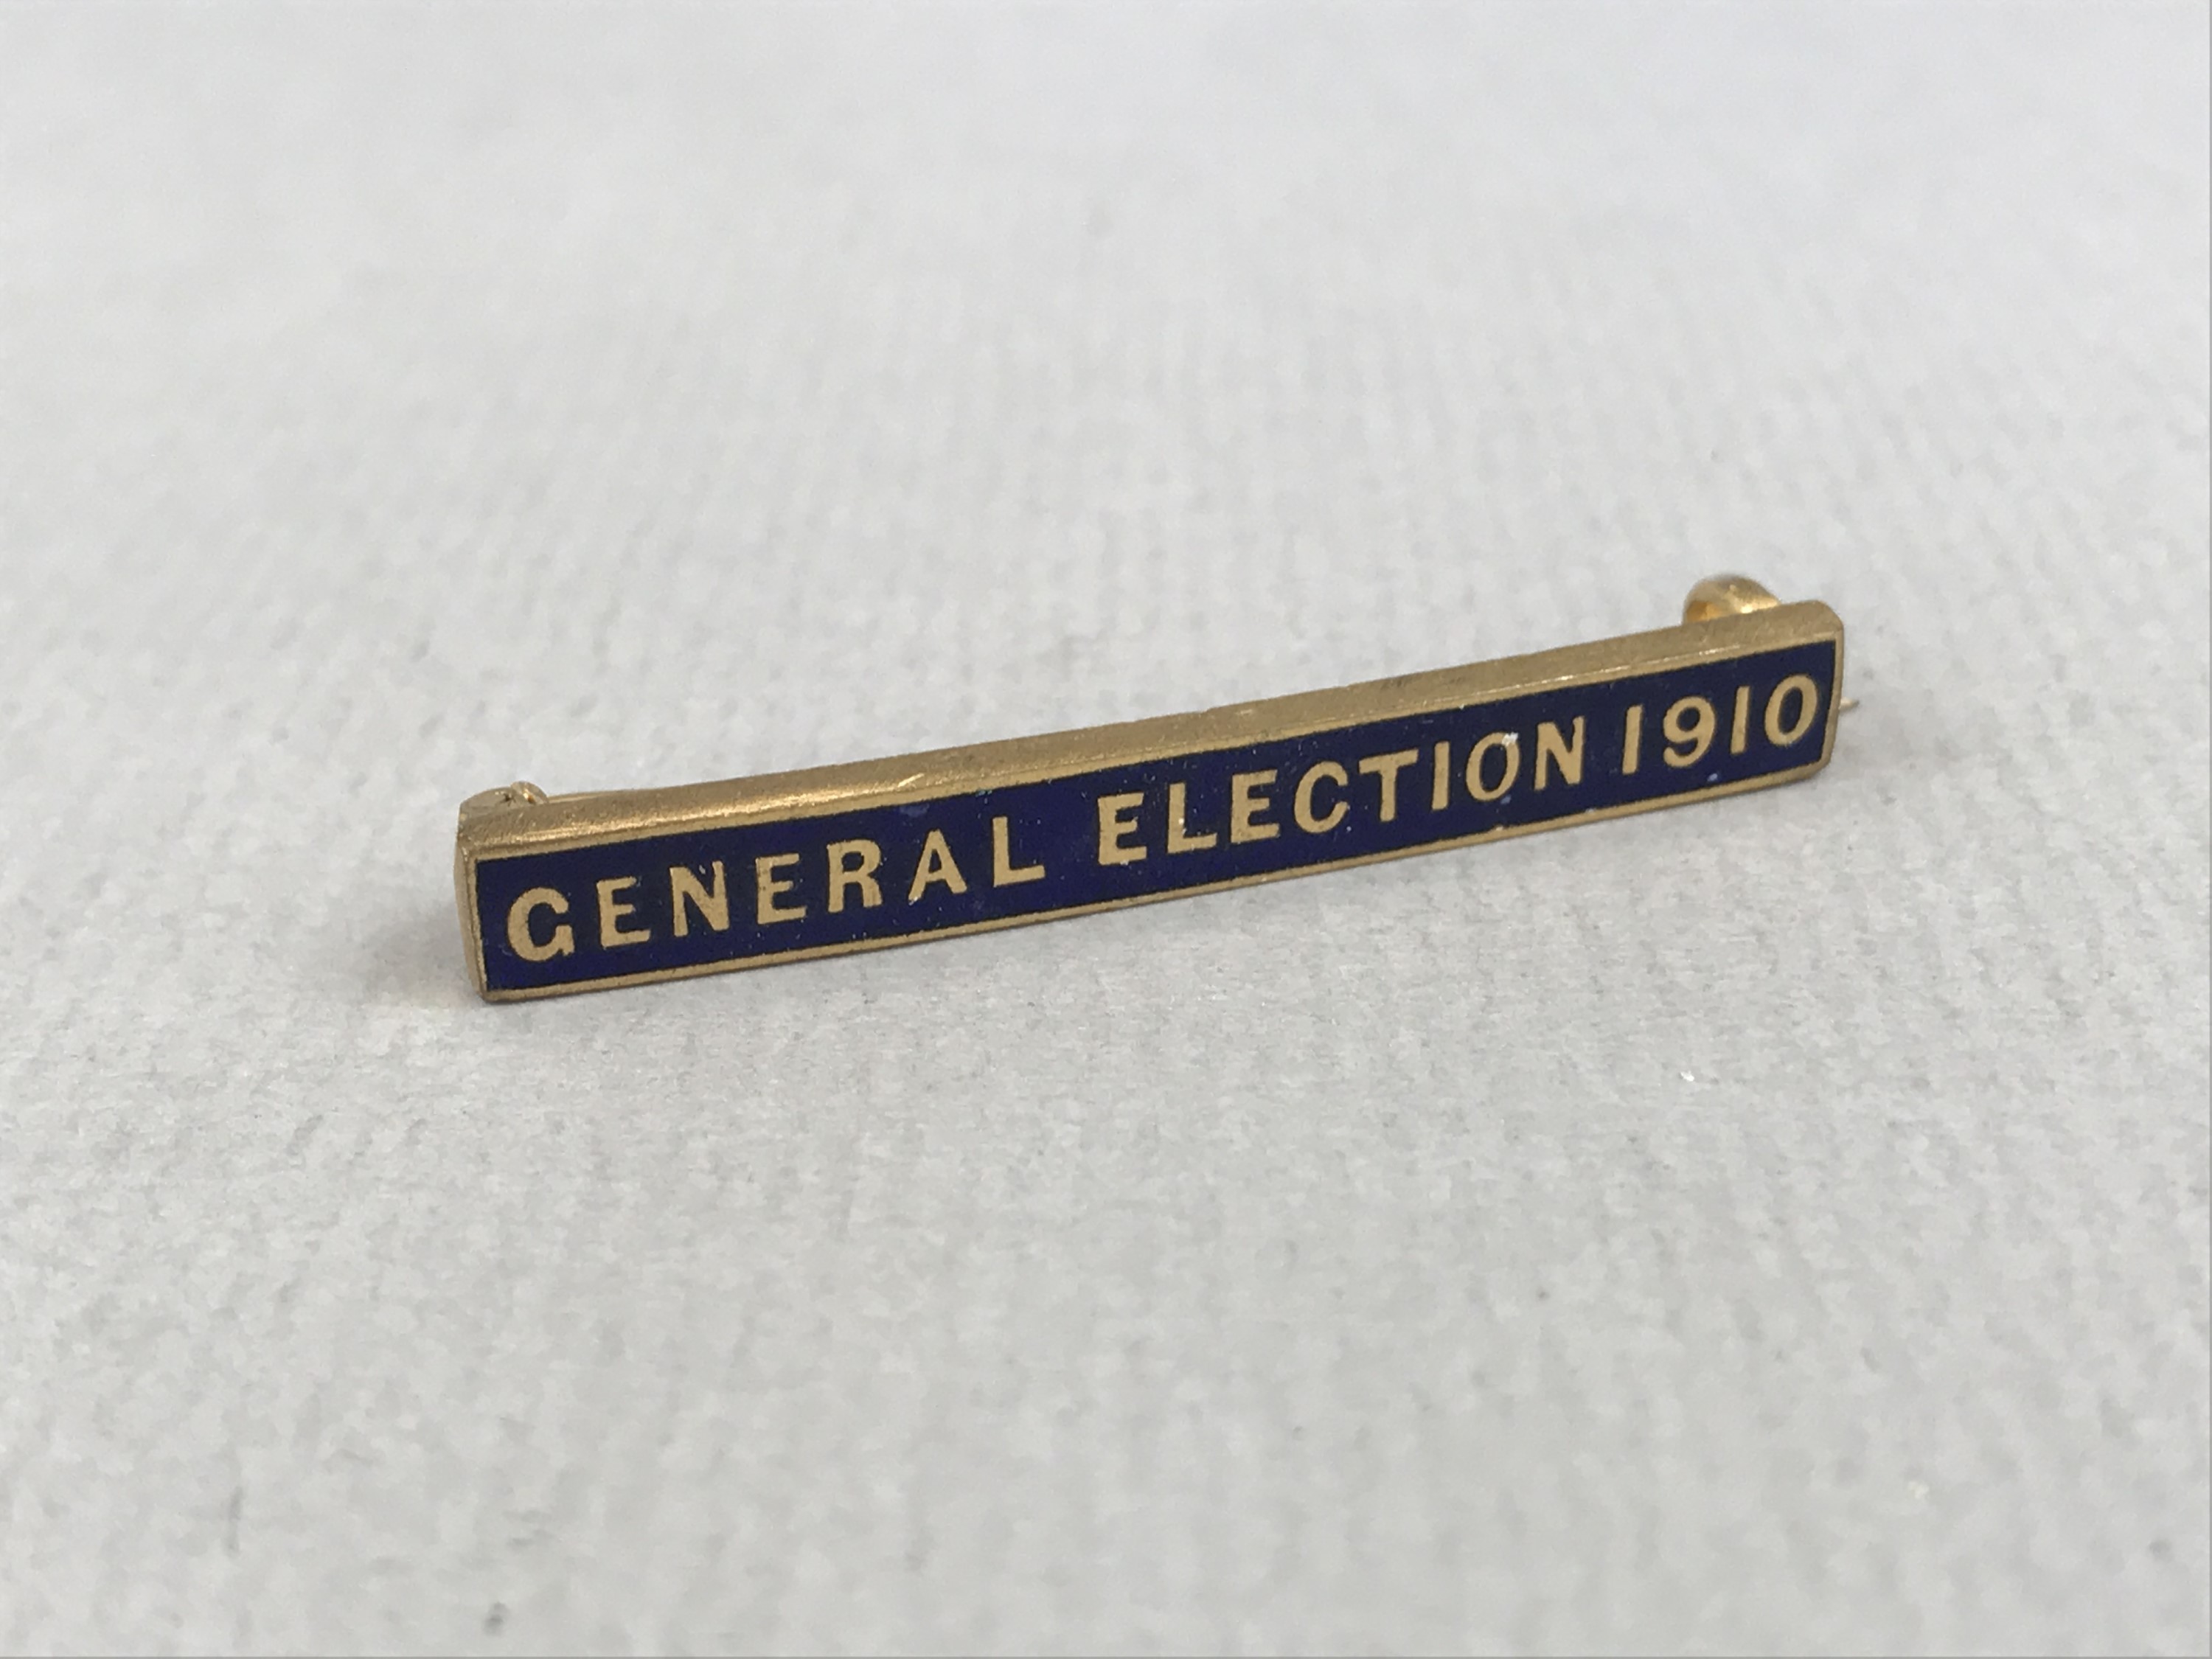 A "General Election 1910" rolled-gold and enamelled bar brooch, manufactured by Wolewis of